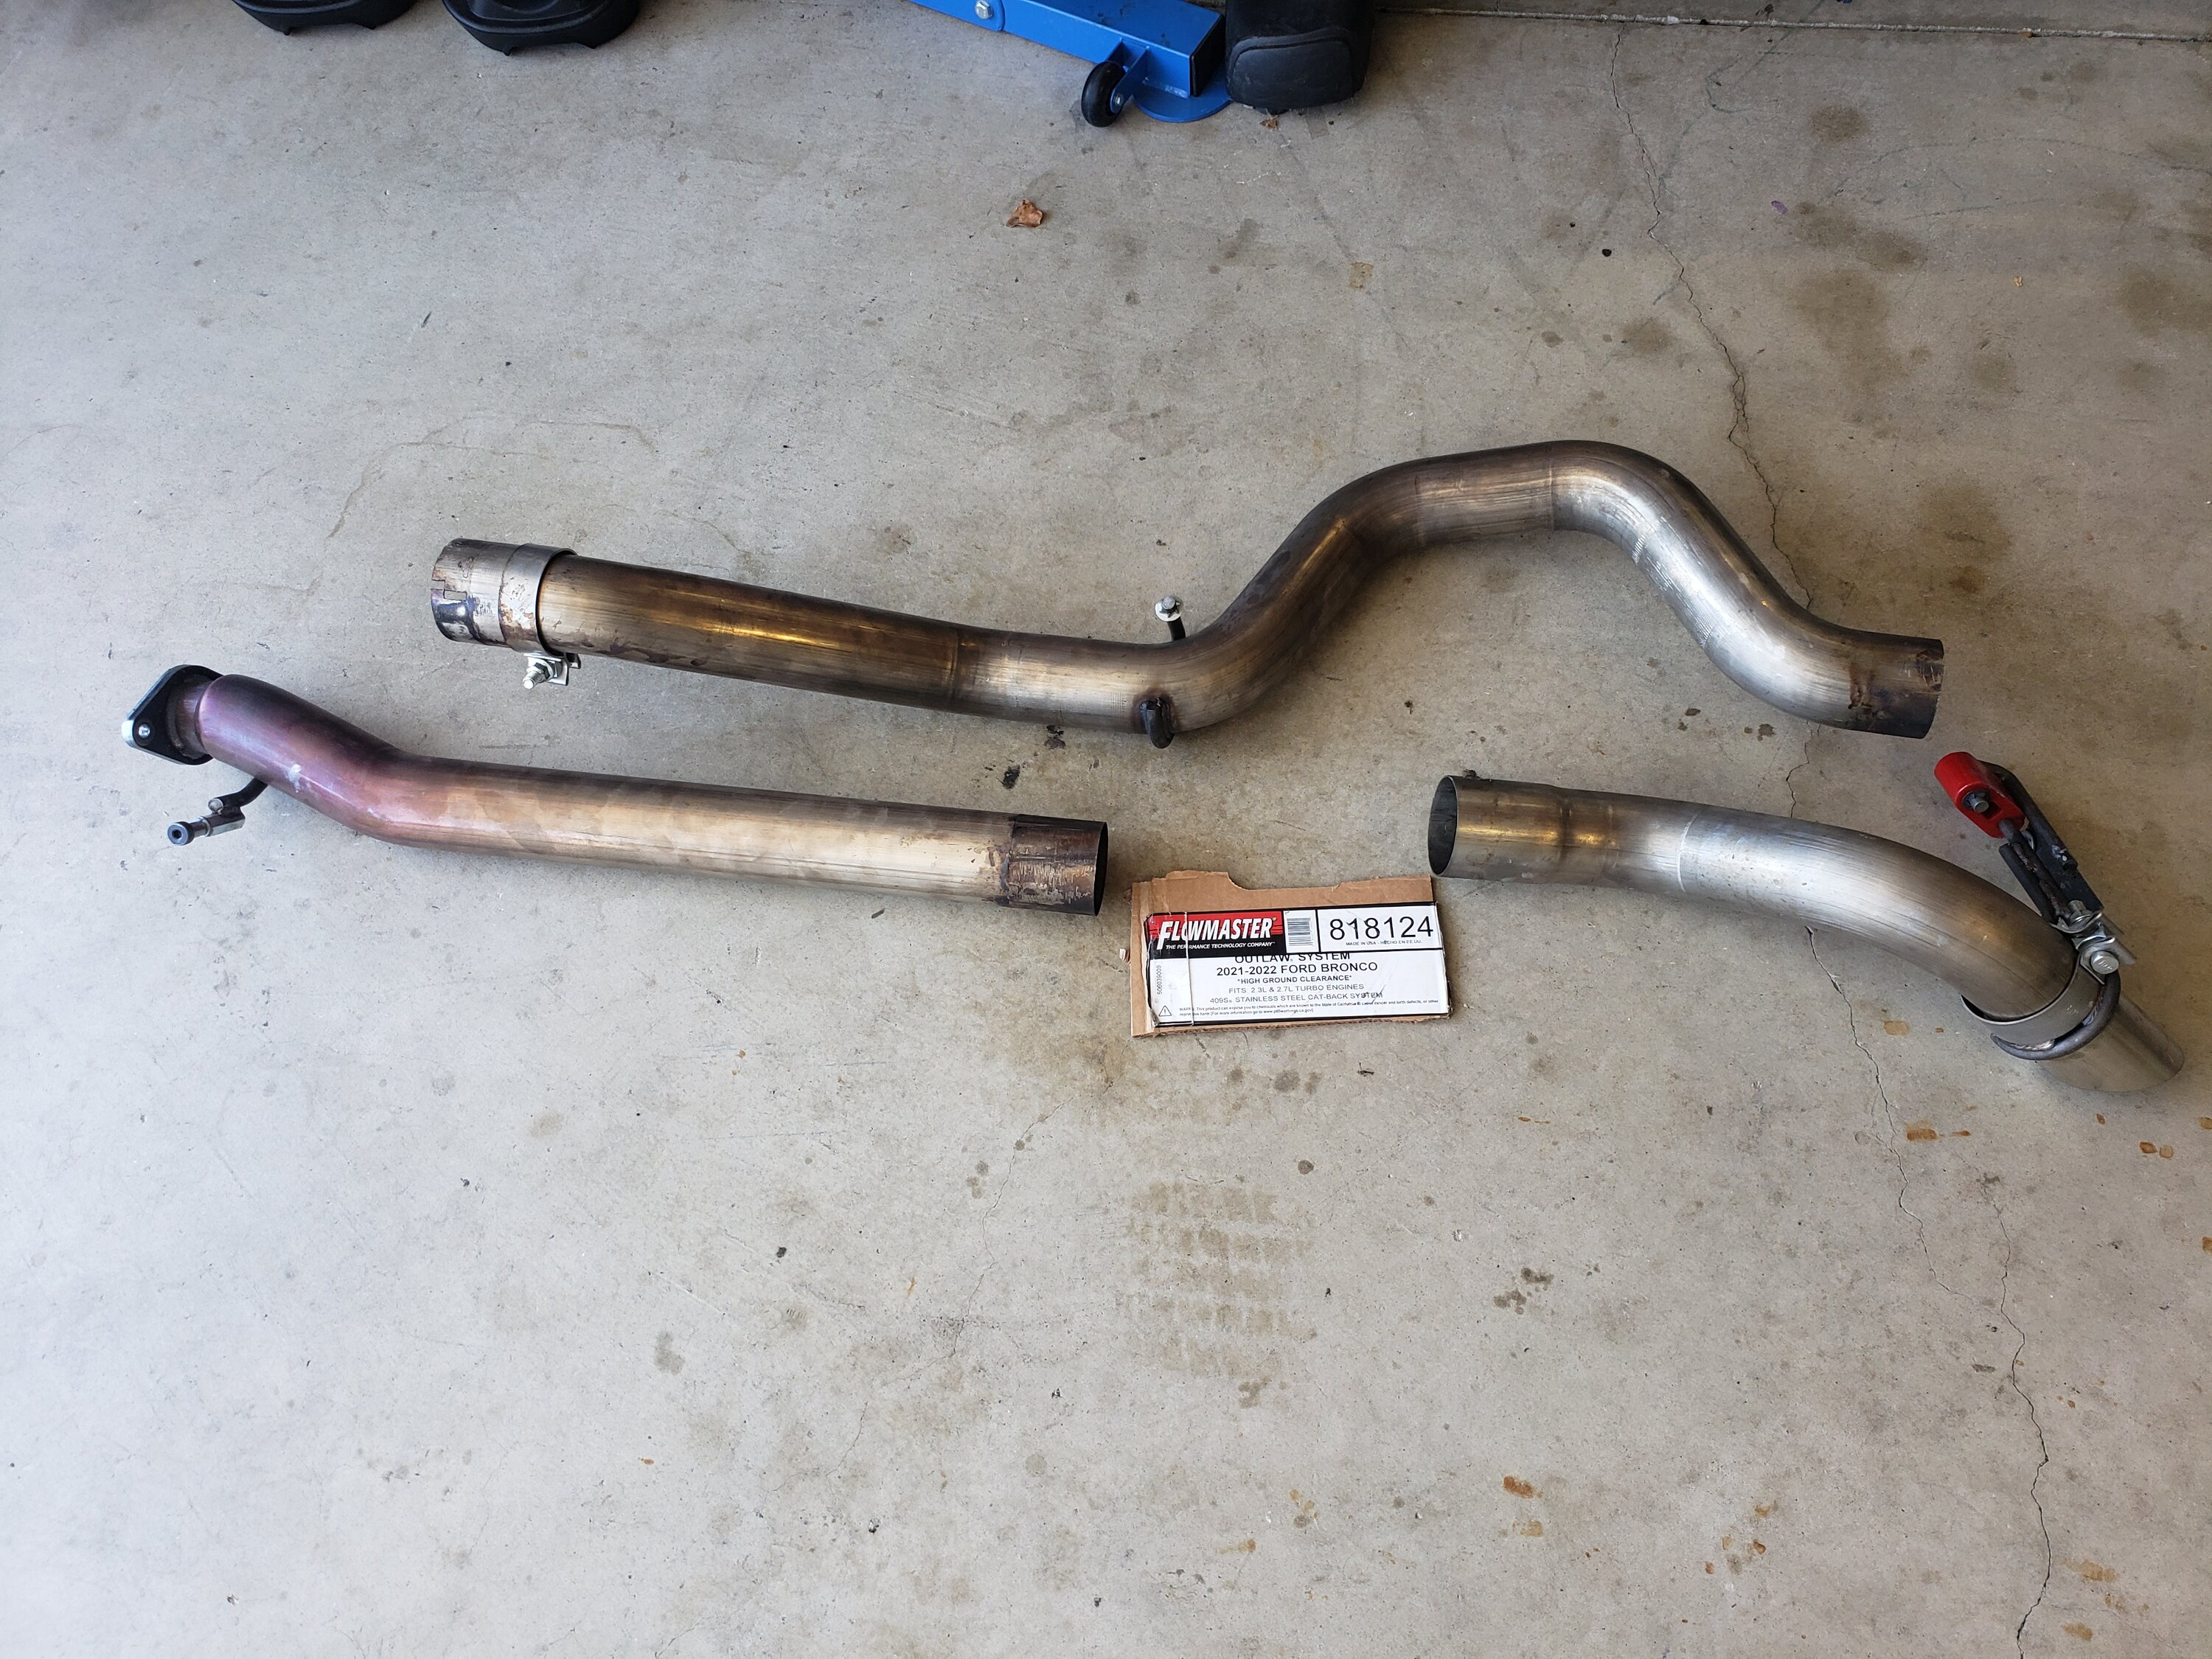 Ford Bronco Flowmaster Cat-Back Exhaust For Sale - So Cal - price drop to $200.00 20220611_105138